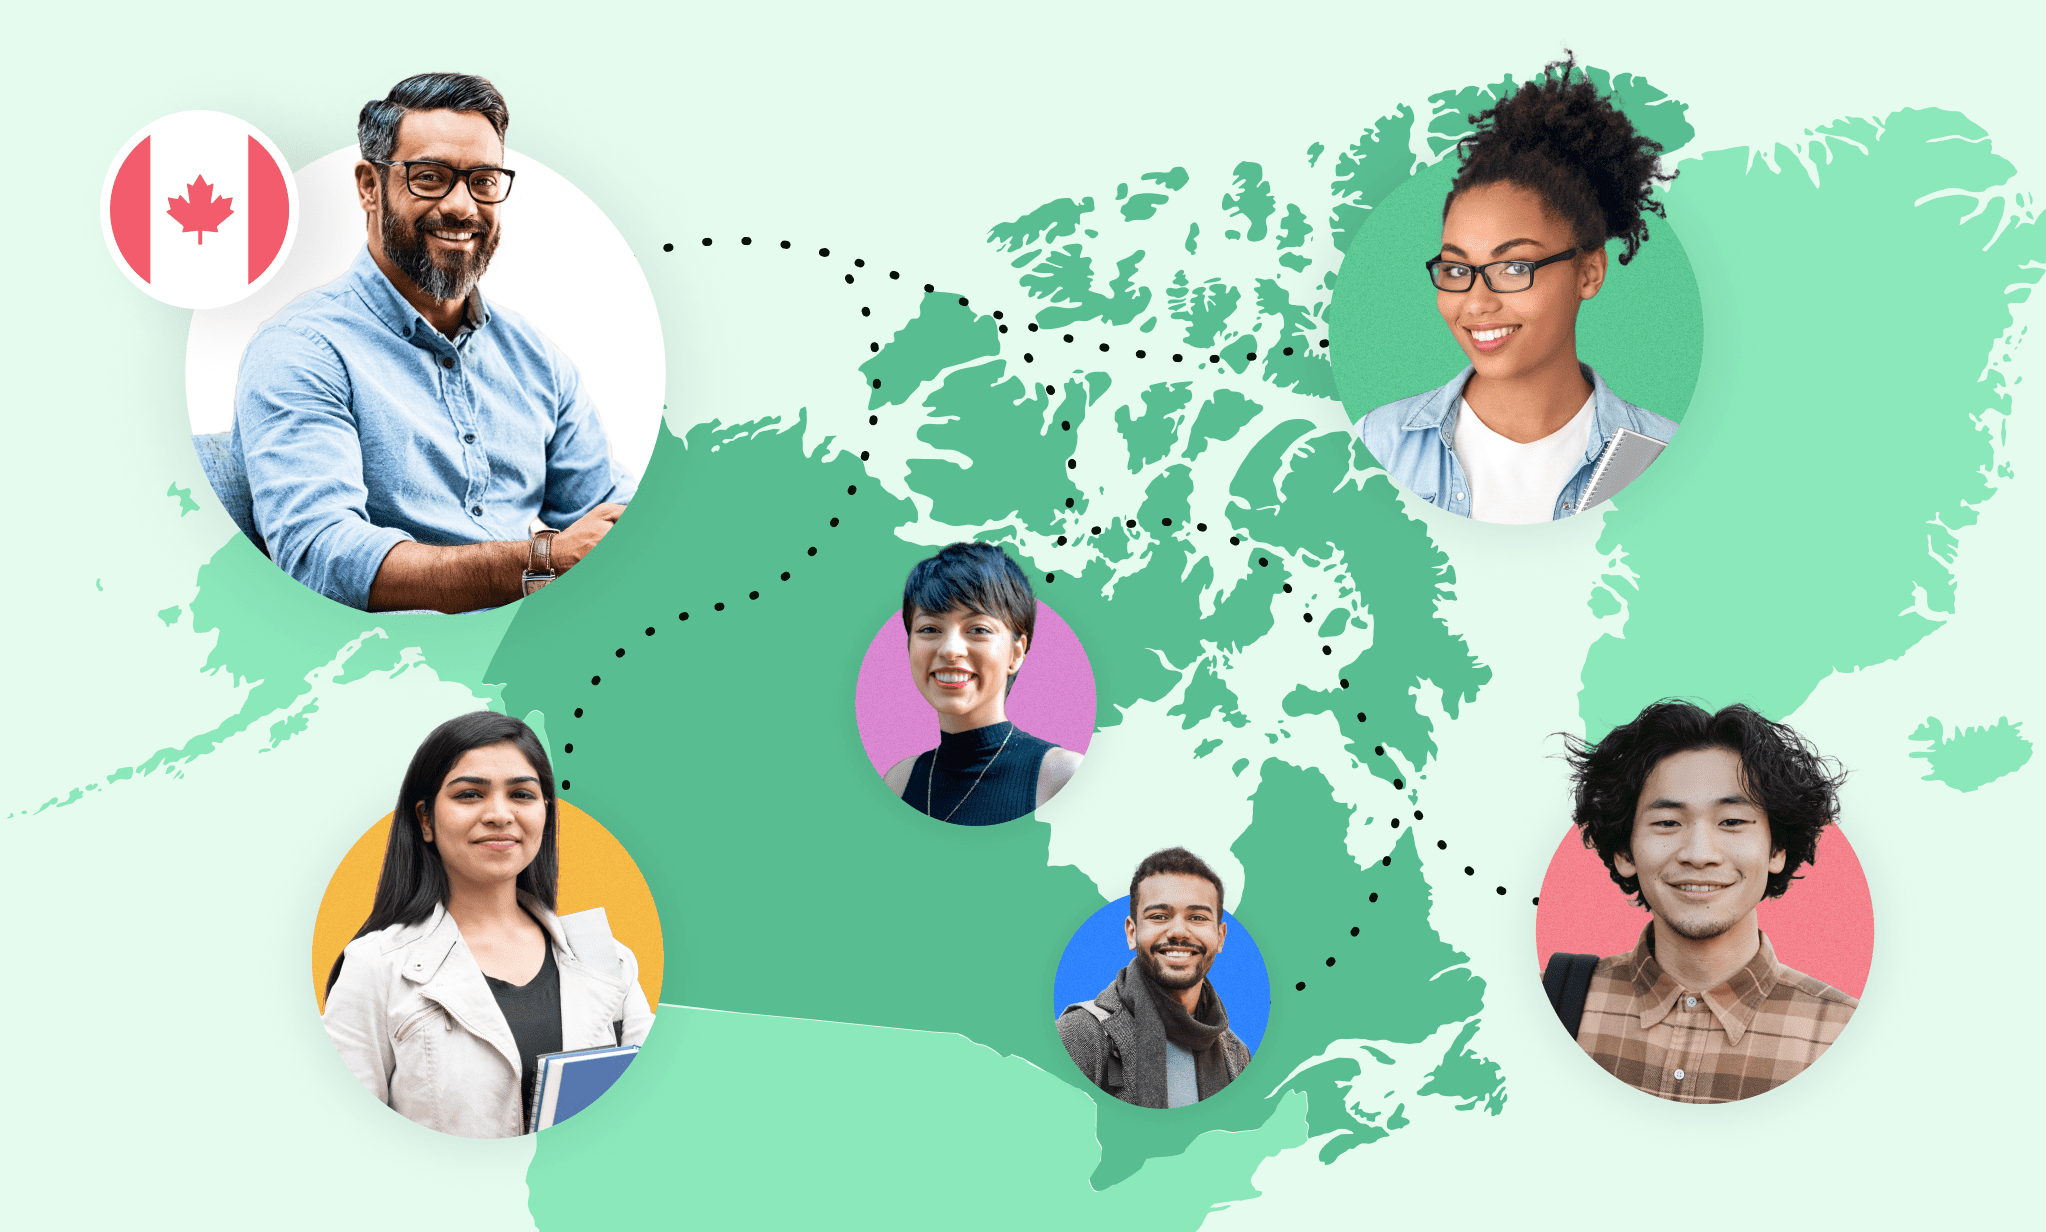 An illustration of Canada on a map with photos of people overlaid and scattered across the image.